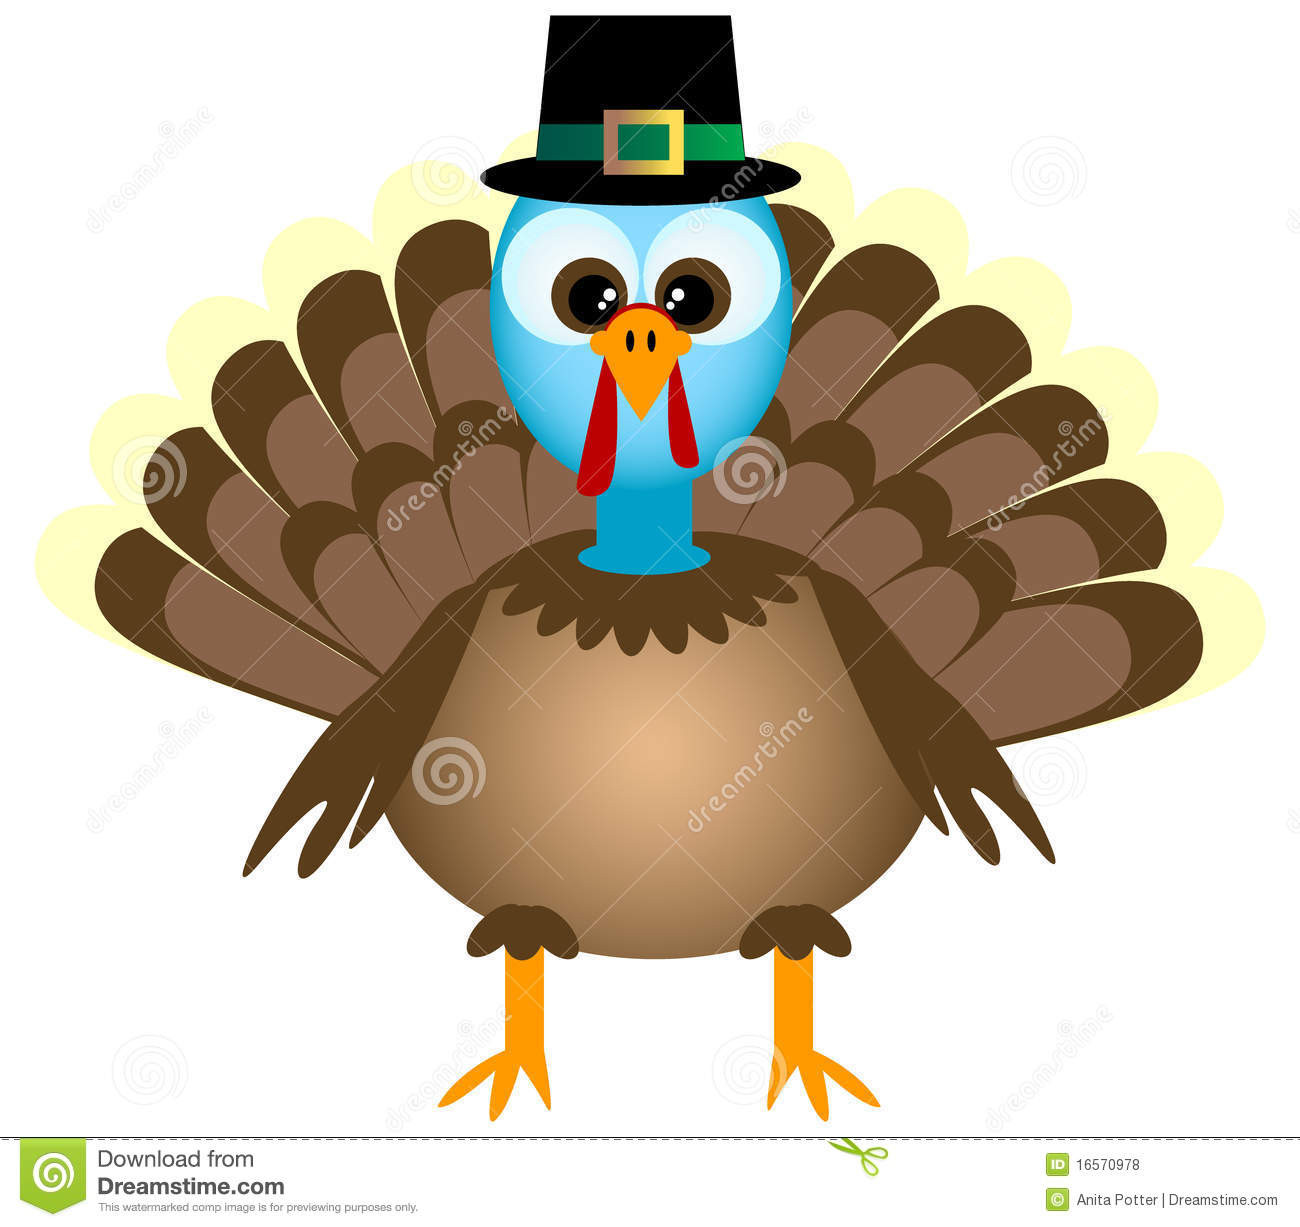 Cartoon Picture Of Turkey For Thanksgiving
 Cartoon Thanksgiving Turkey Stock Vector Illustration of